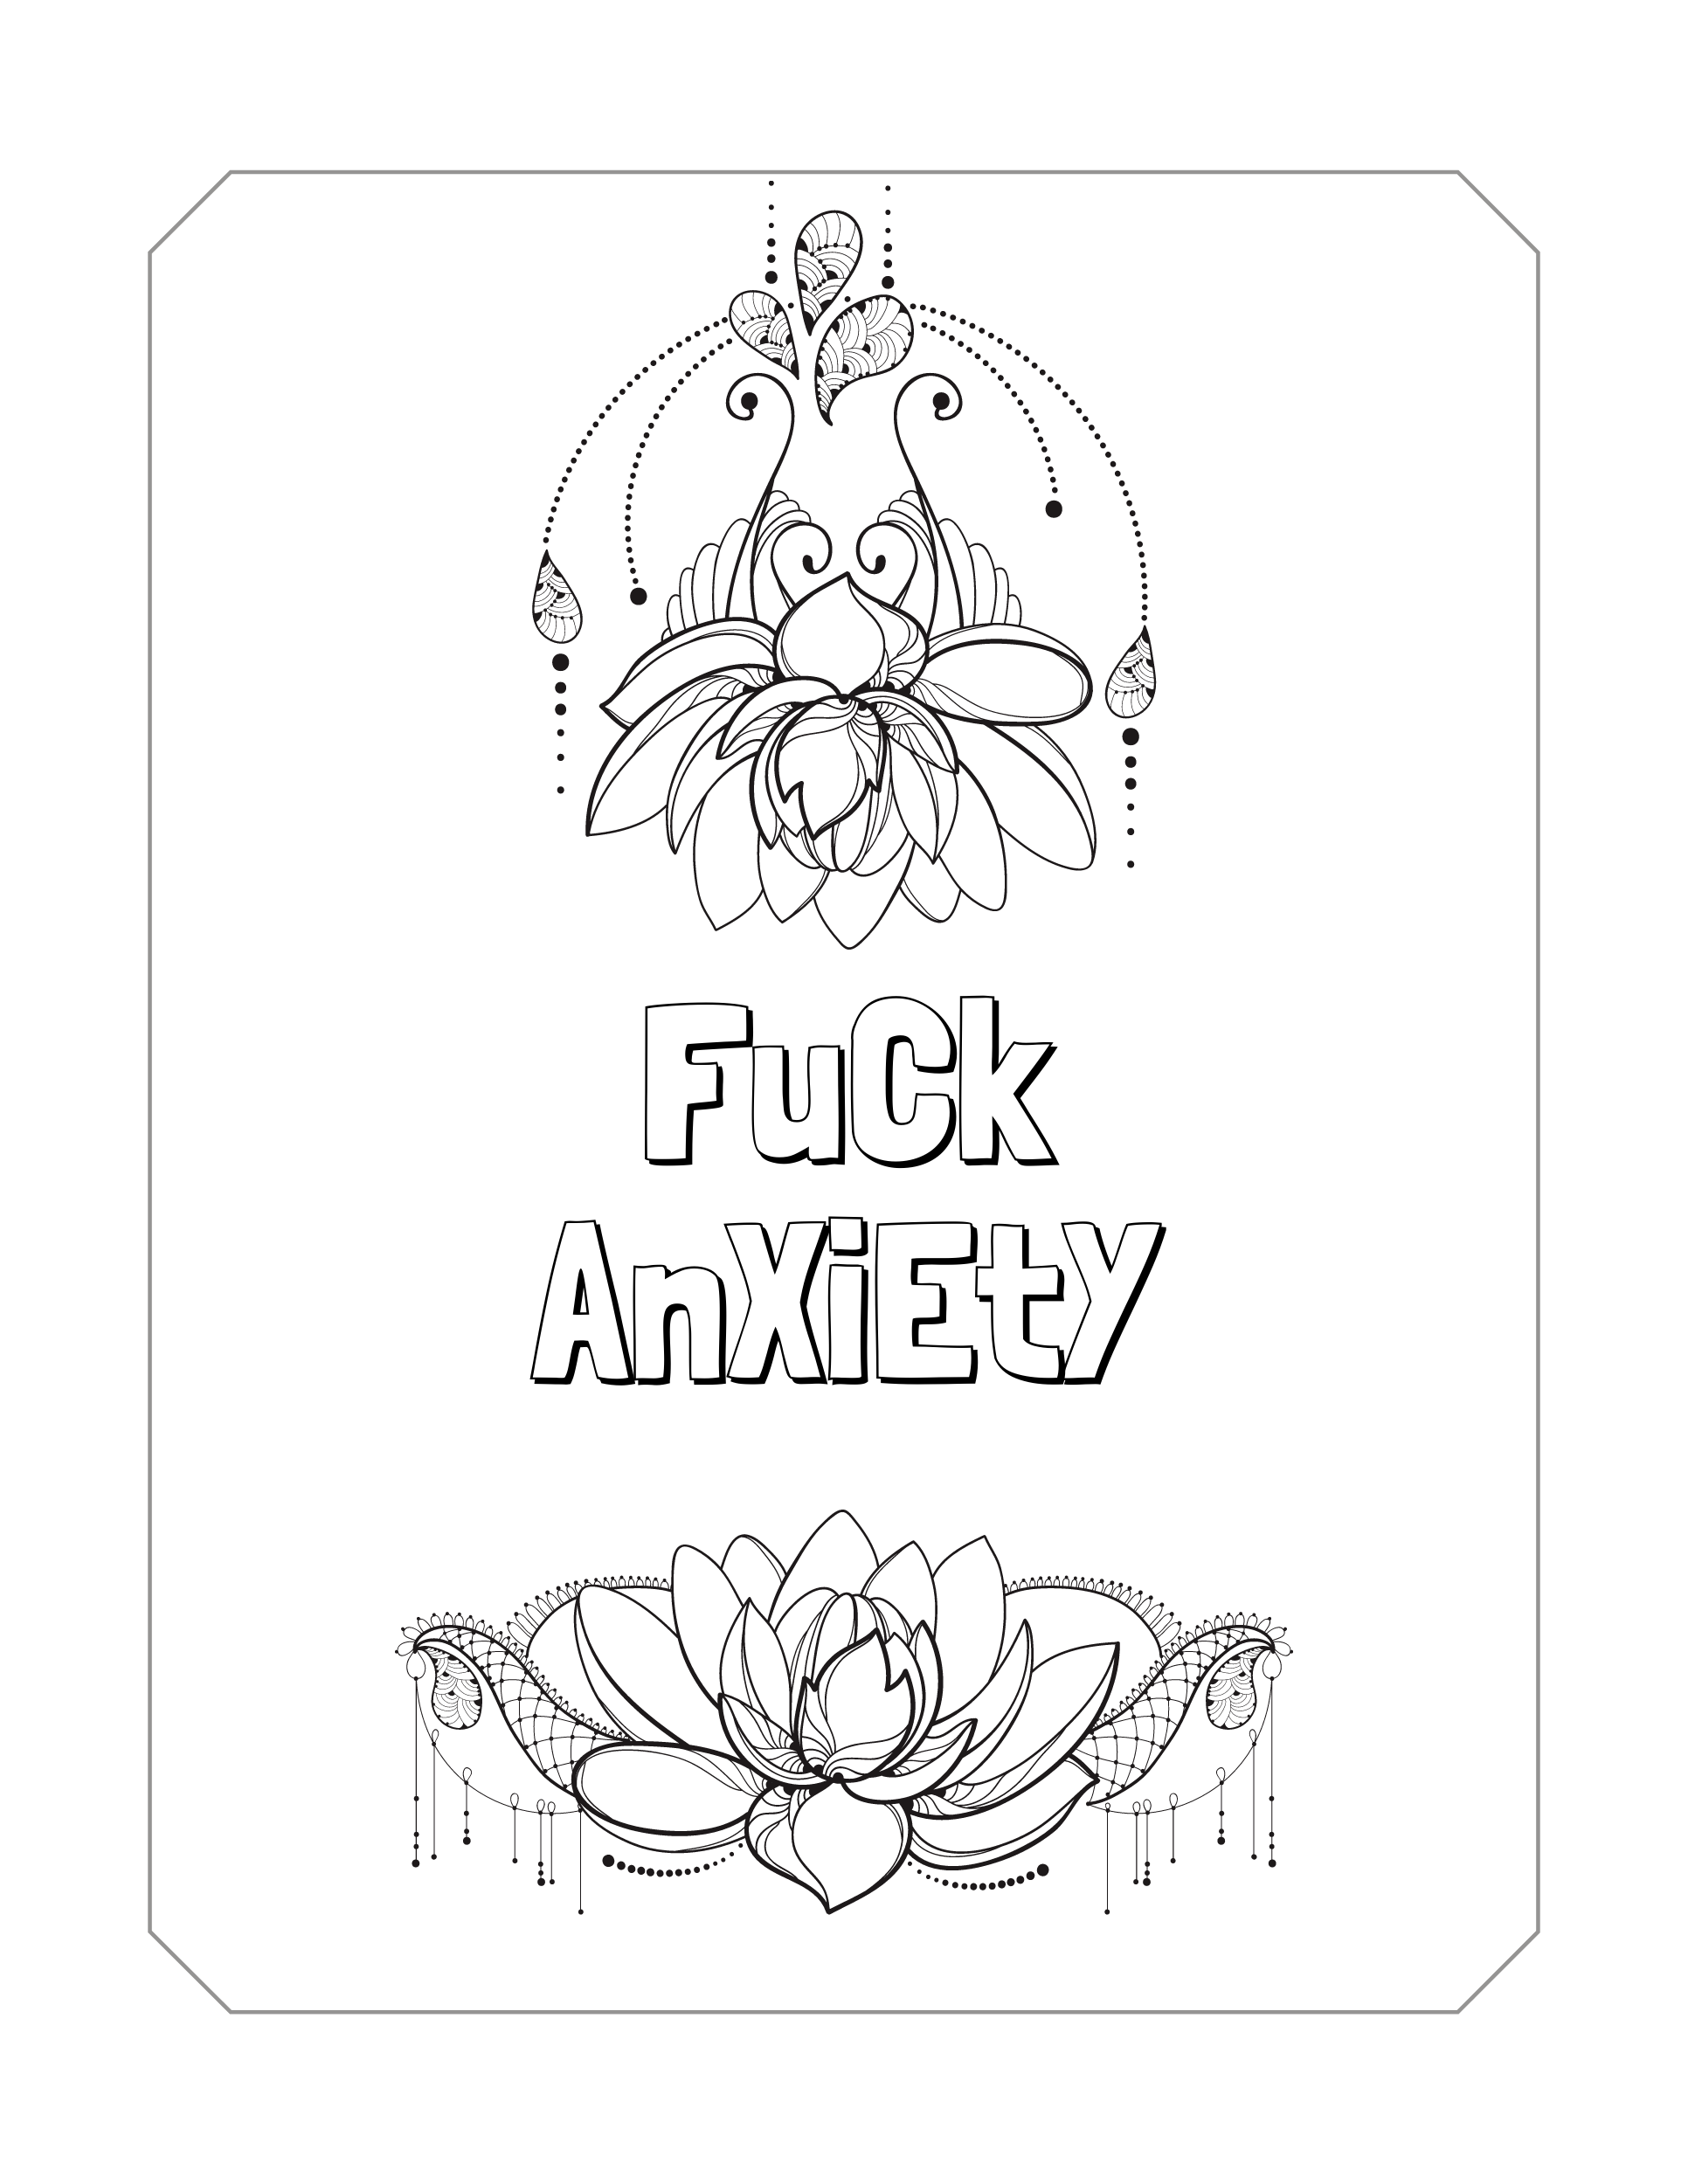 Printable motivational swear word coloring pages for adults funny swe